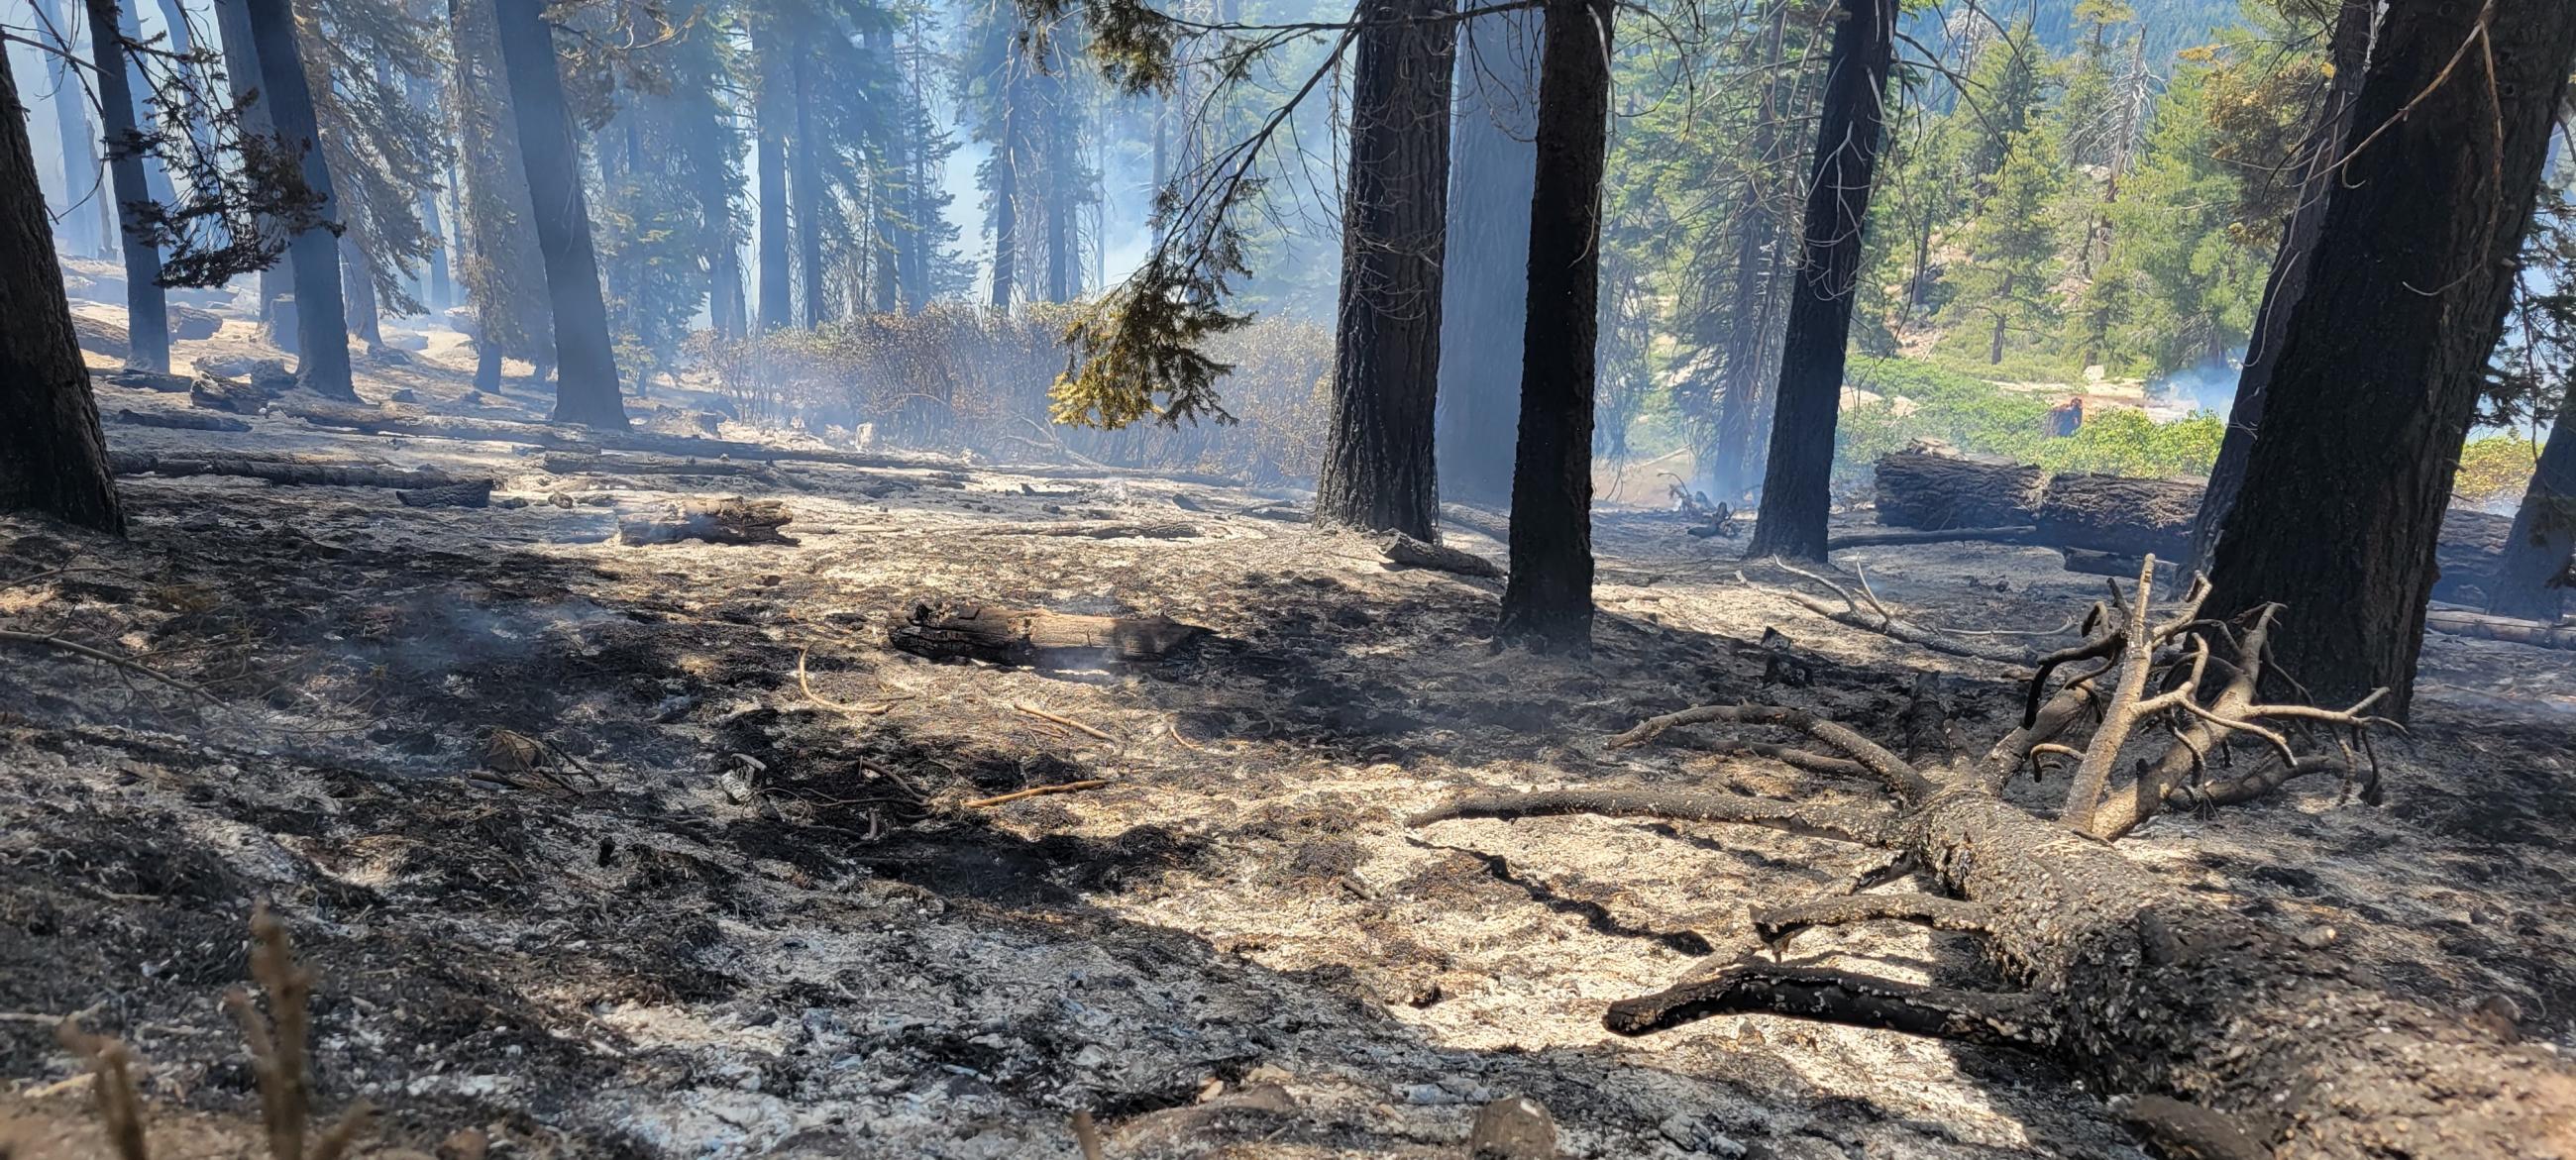 Forest showing consumed dead and down fuels with smoke in the background.